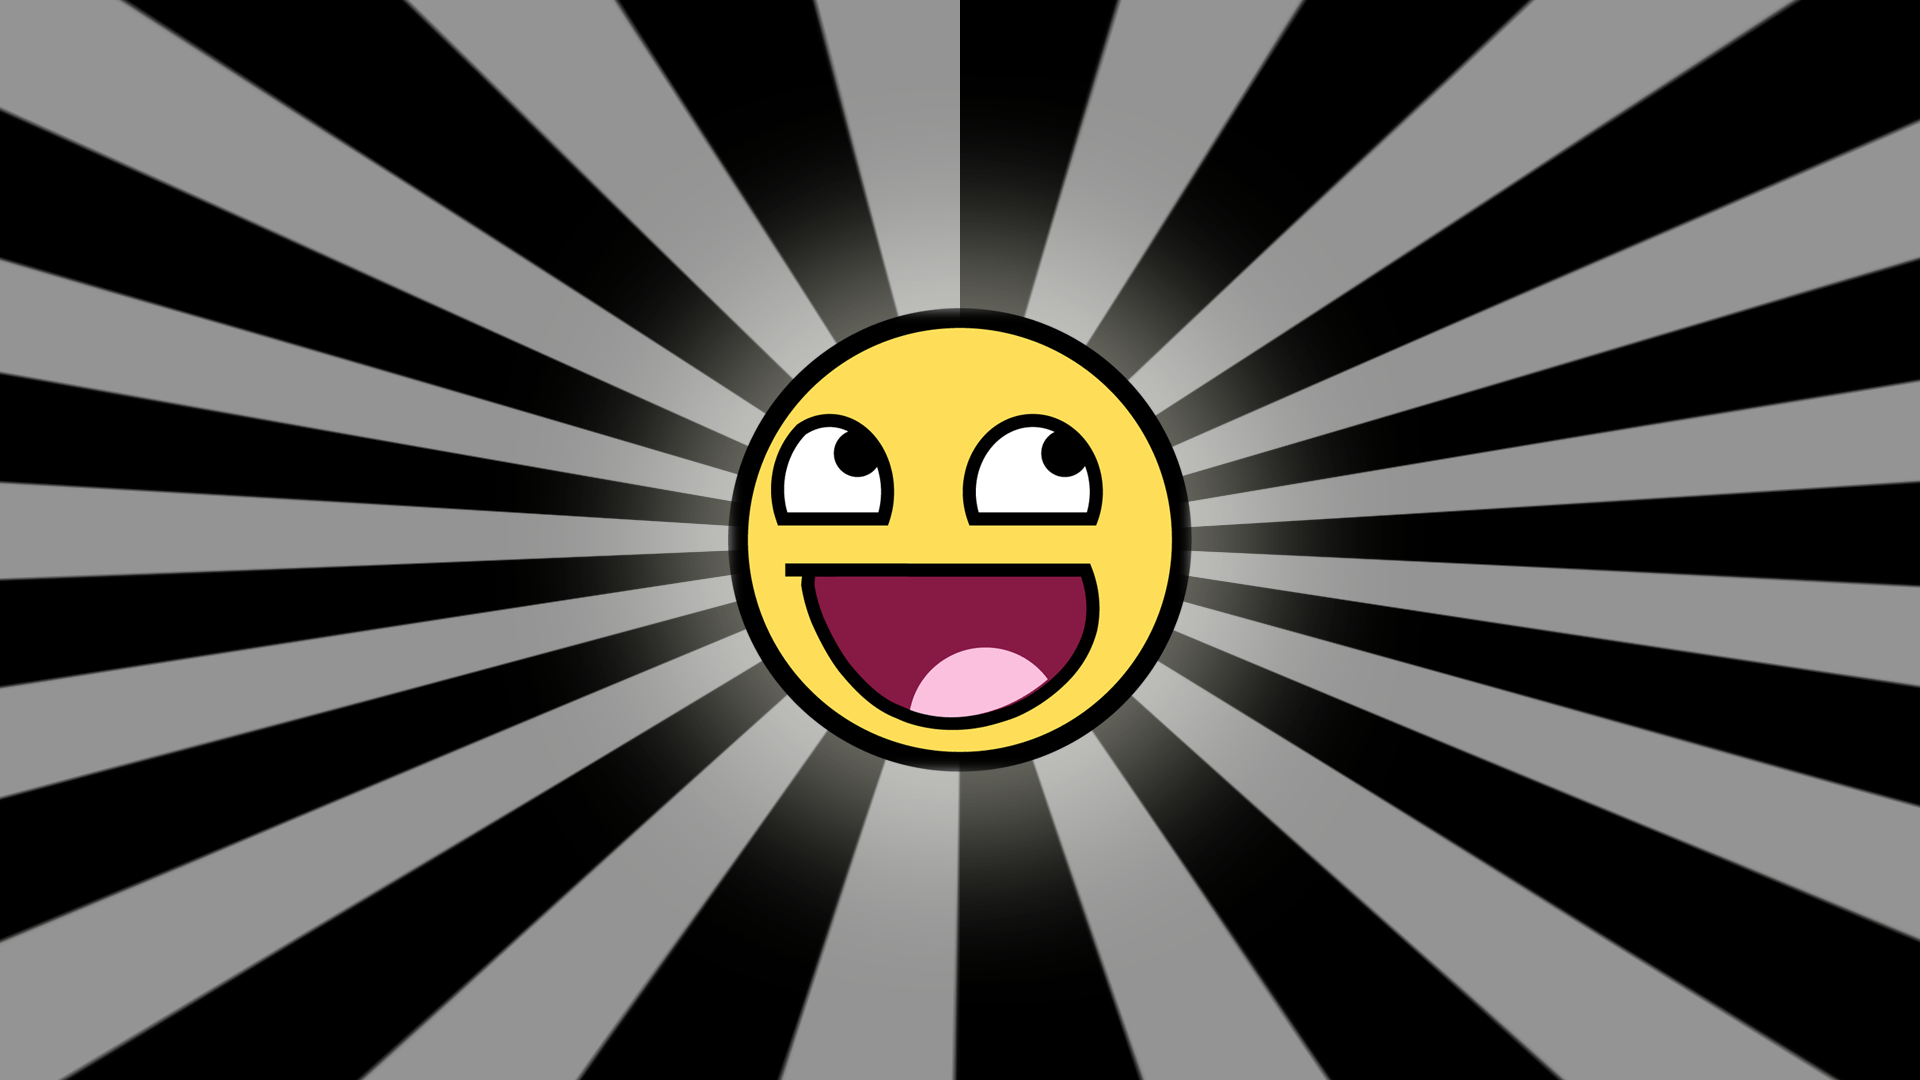 Awesome Face Backgrounds